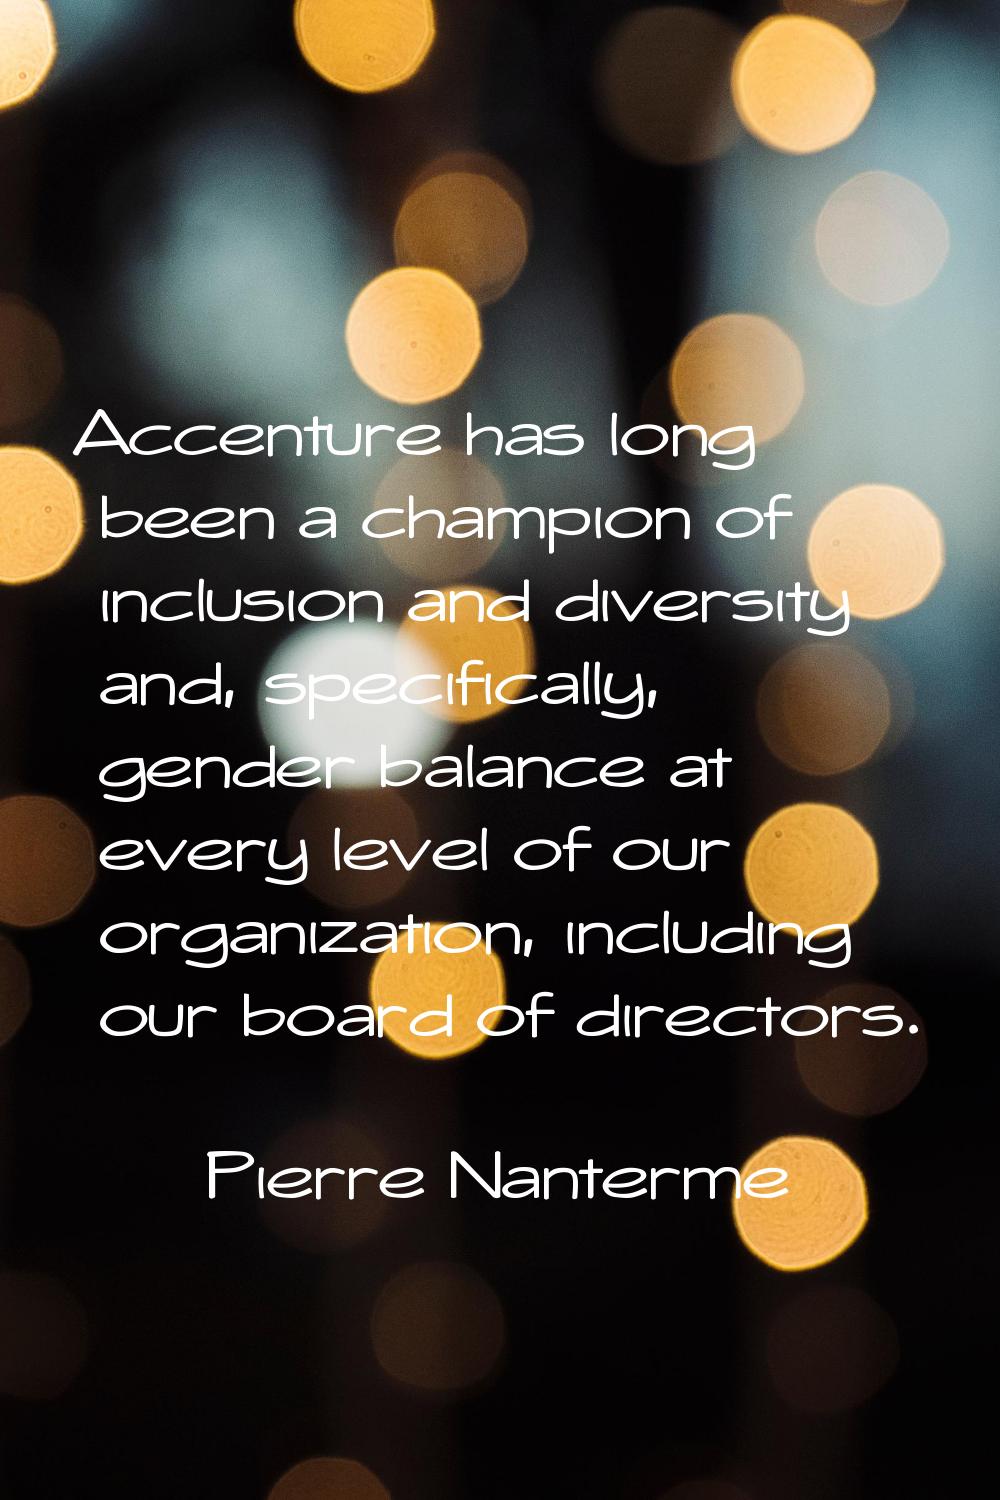 Accenture has long been a champion of inclusion and diversity and, specifically, gender balance at 